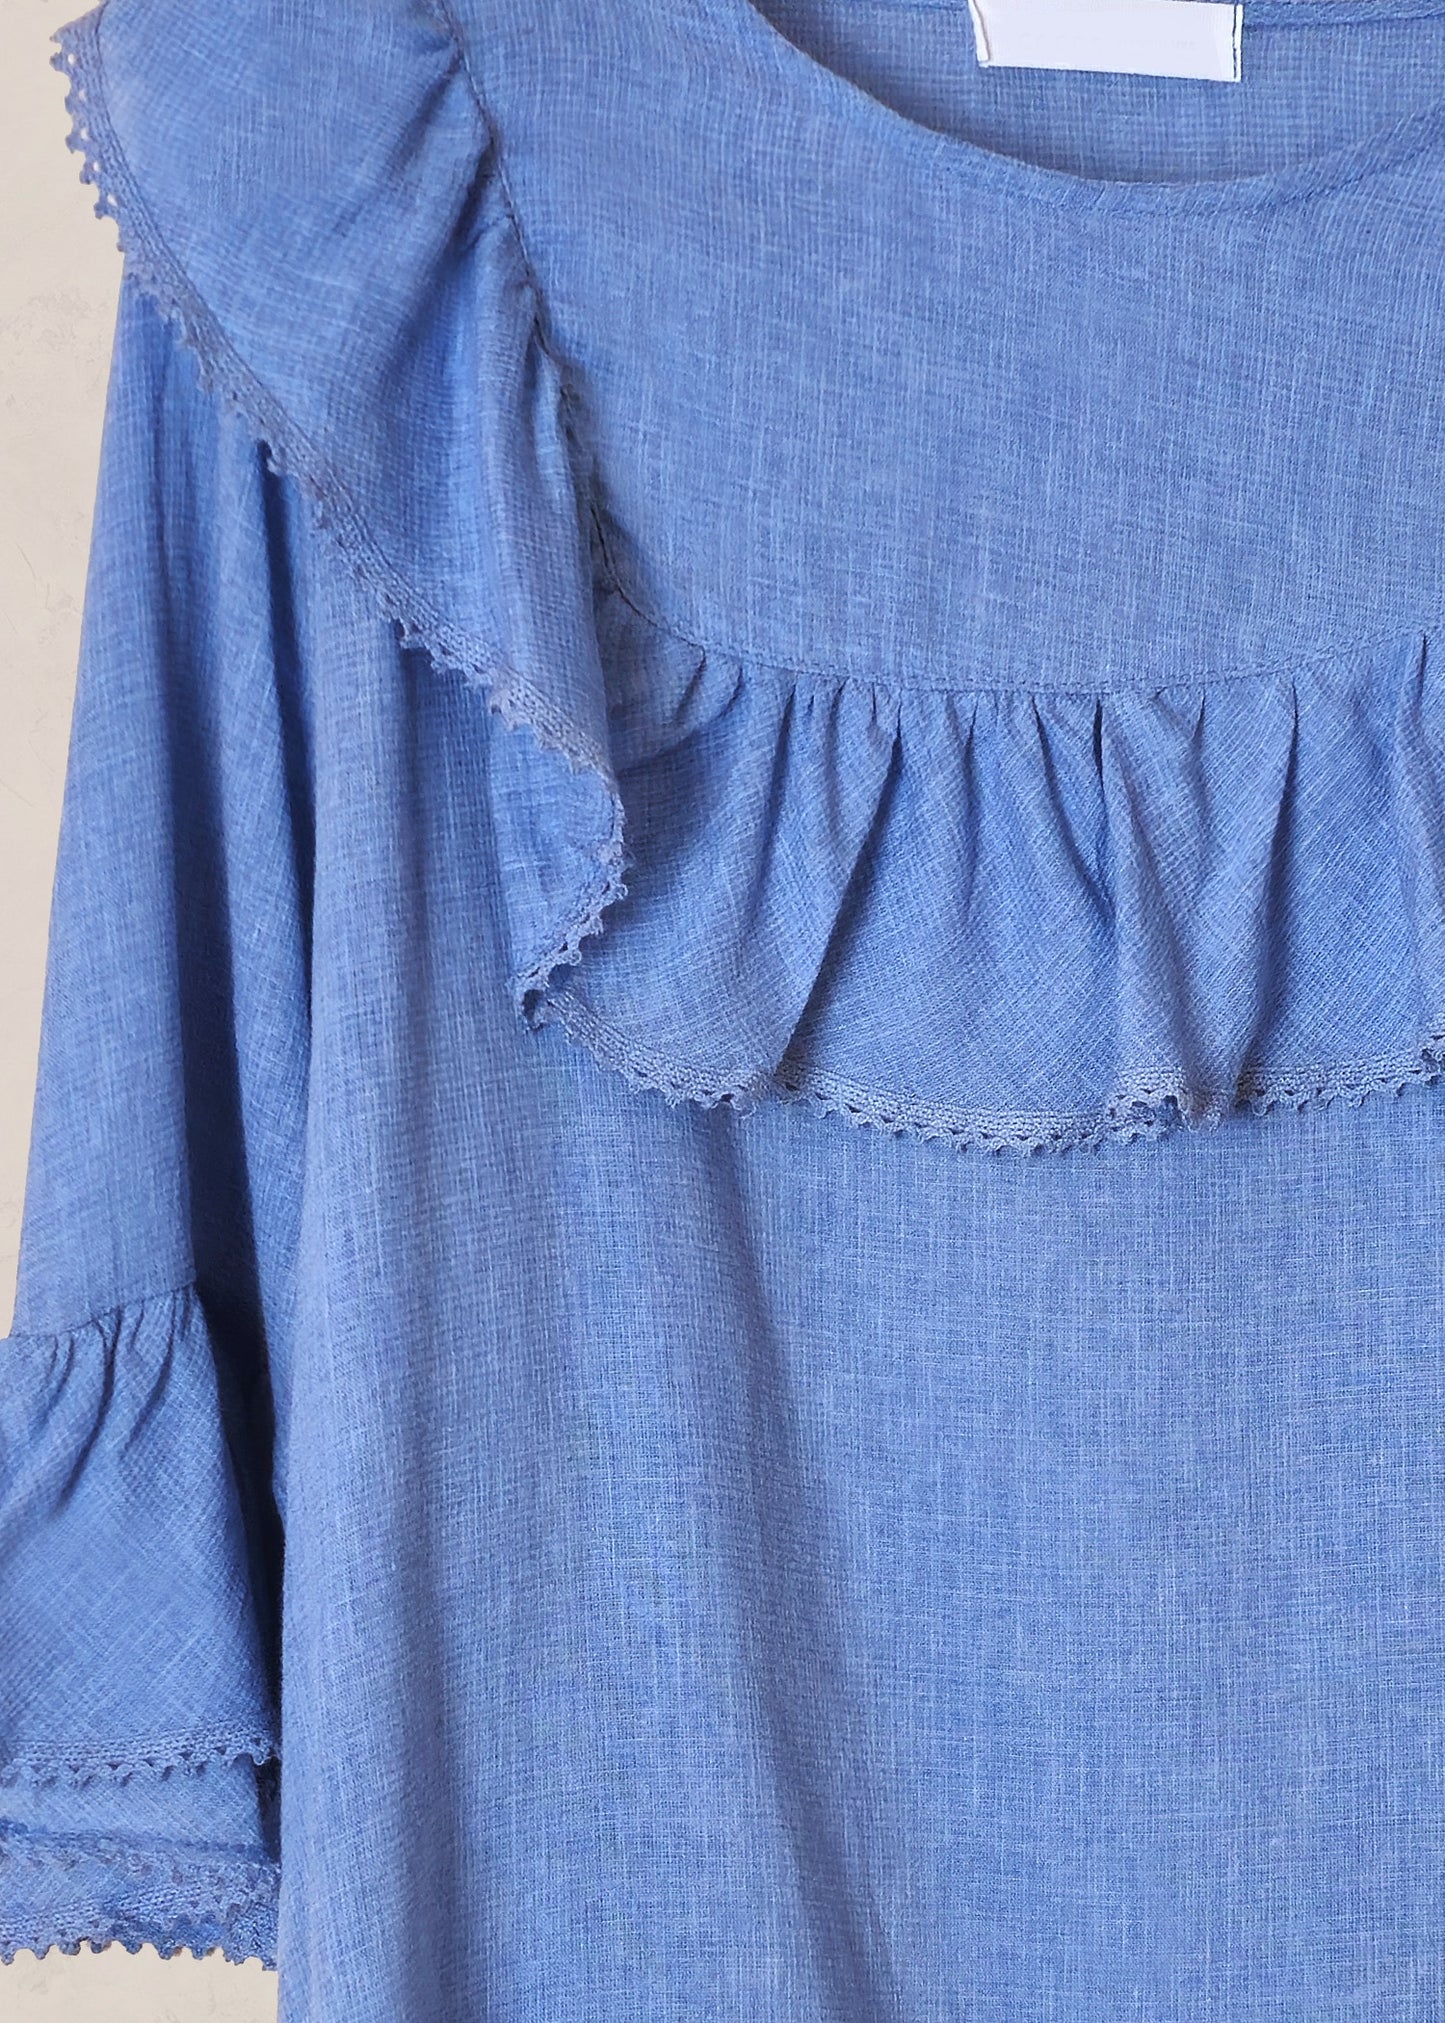 BLUEBELL Top